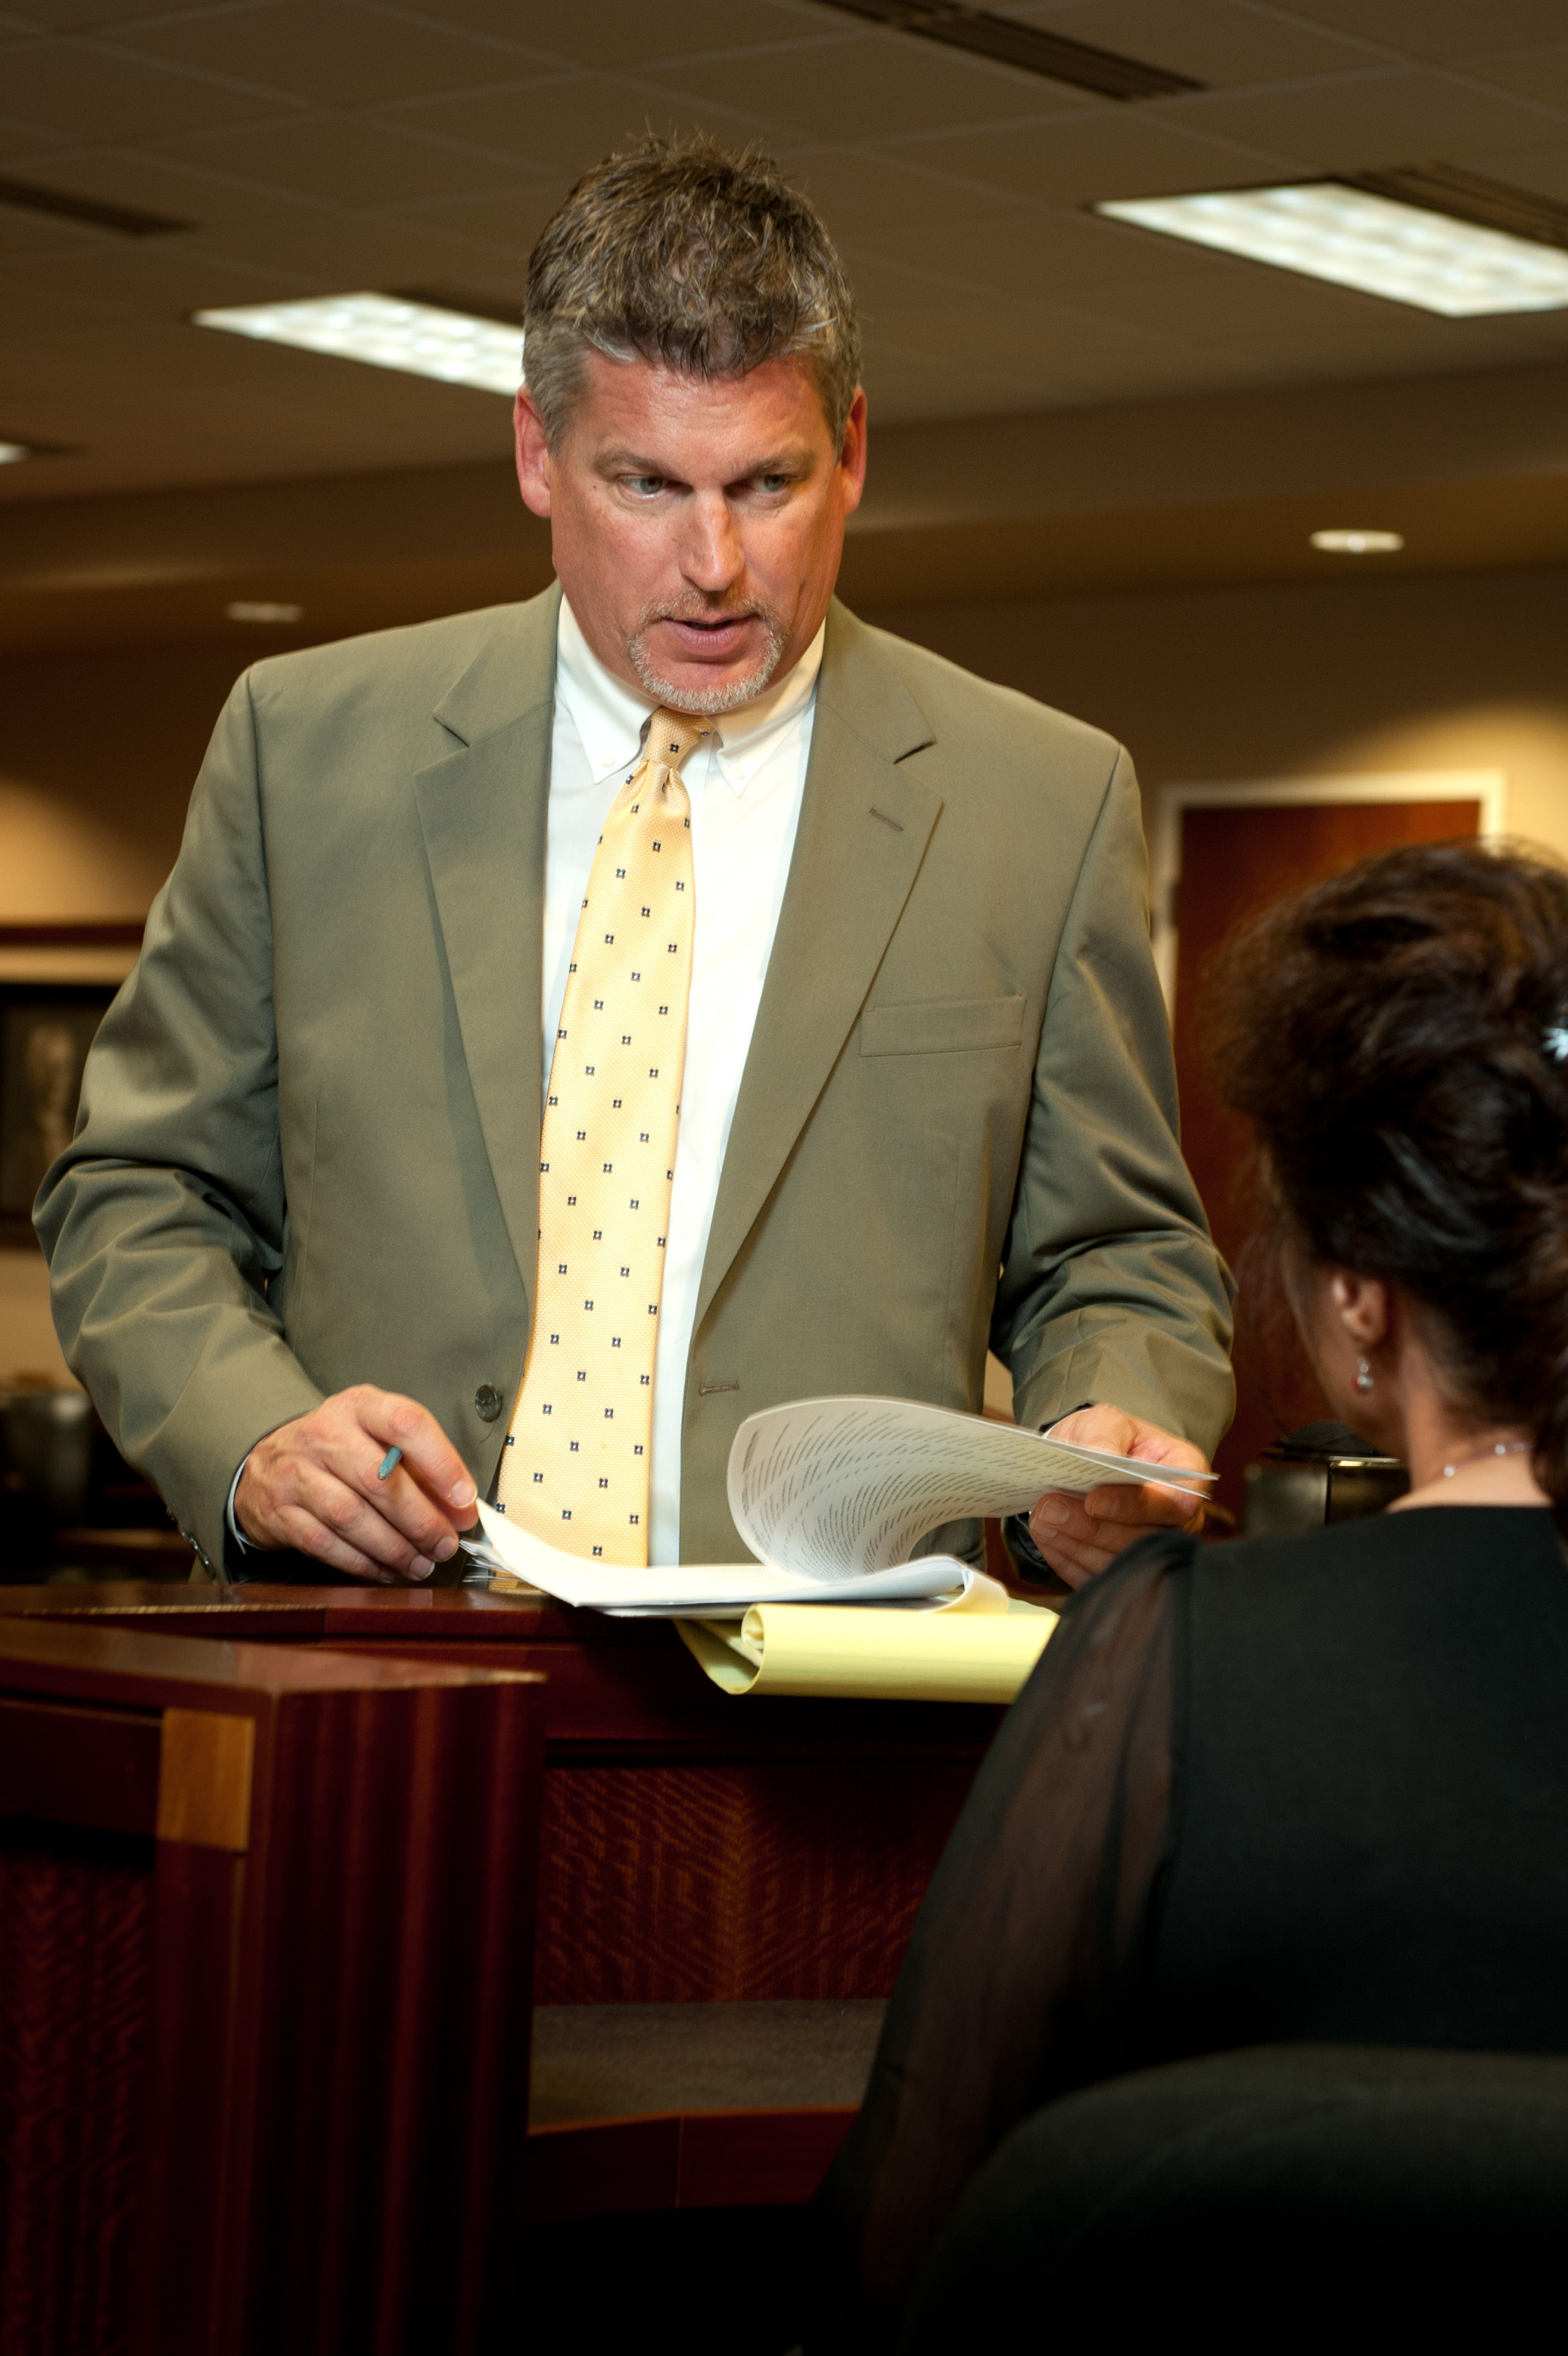 Attorney Paul J. Dickman presenting his case to the judge